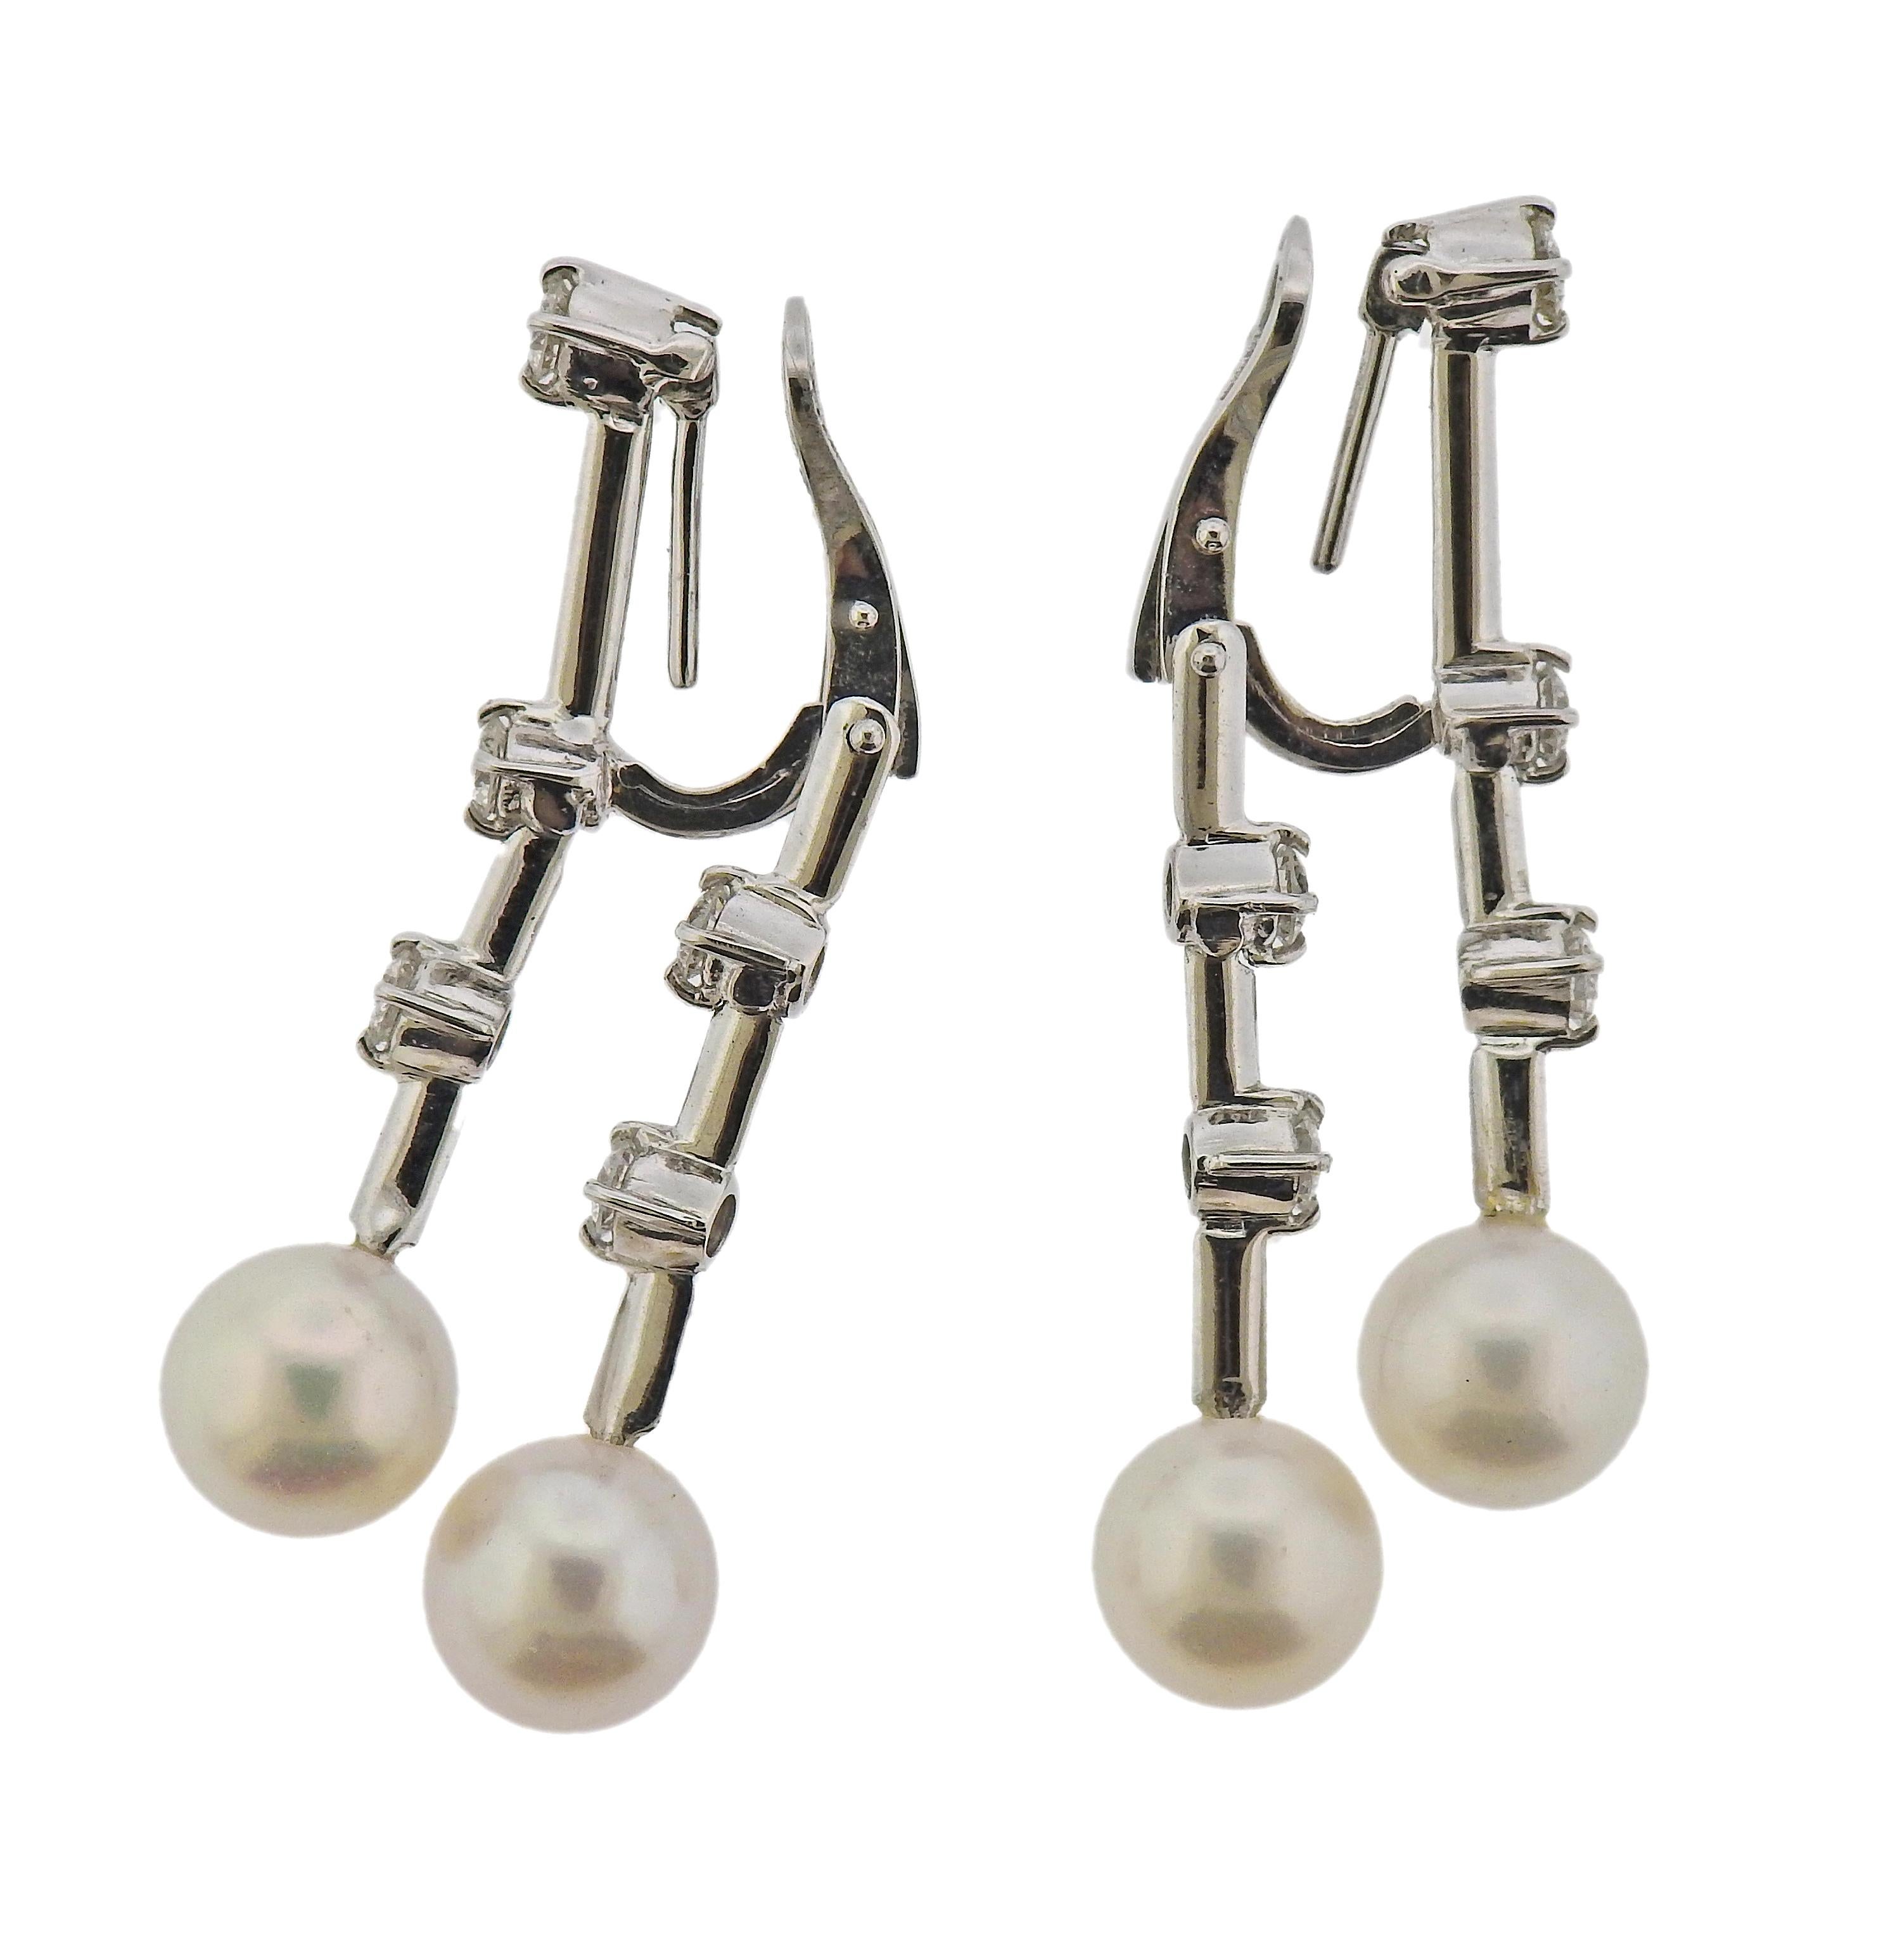 Pair of 18k white gold cocktail earrings by Stefan Hafner, set with 8.7-9mm pearls and approx. 1.06ctw in GH/VS diamonds. Earrings are 42mm long, with collapsible posts. Weight - 11.9 grams. Marked:  SH, 750, Italian mark.